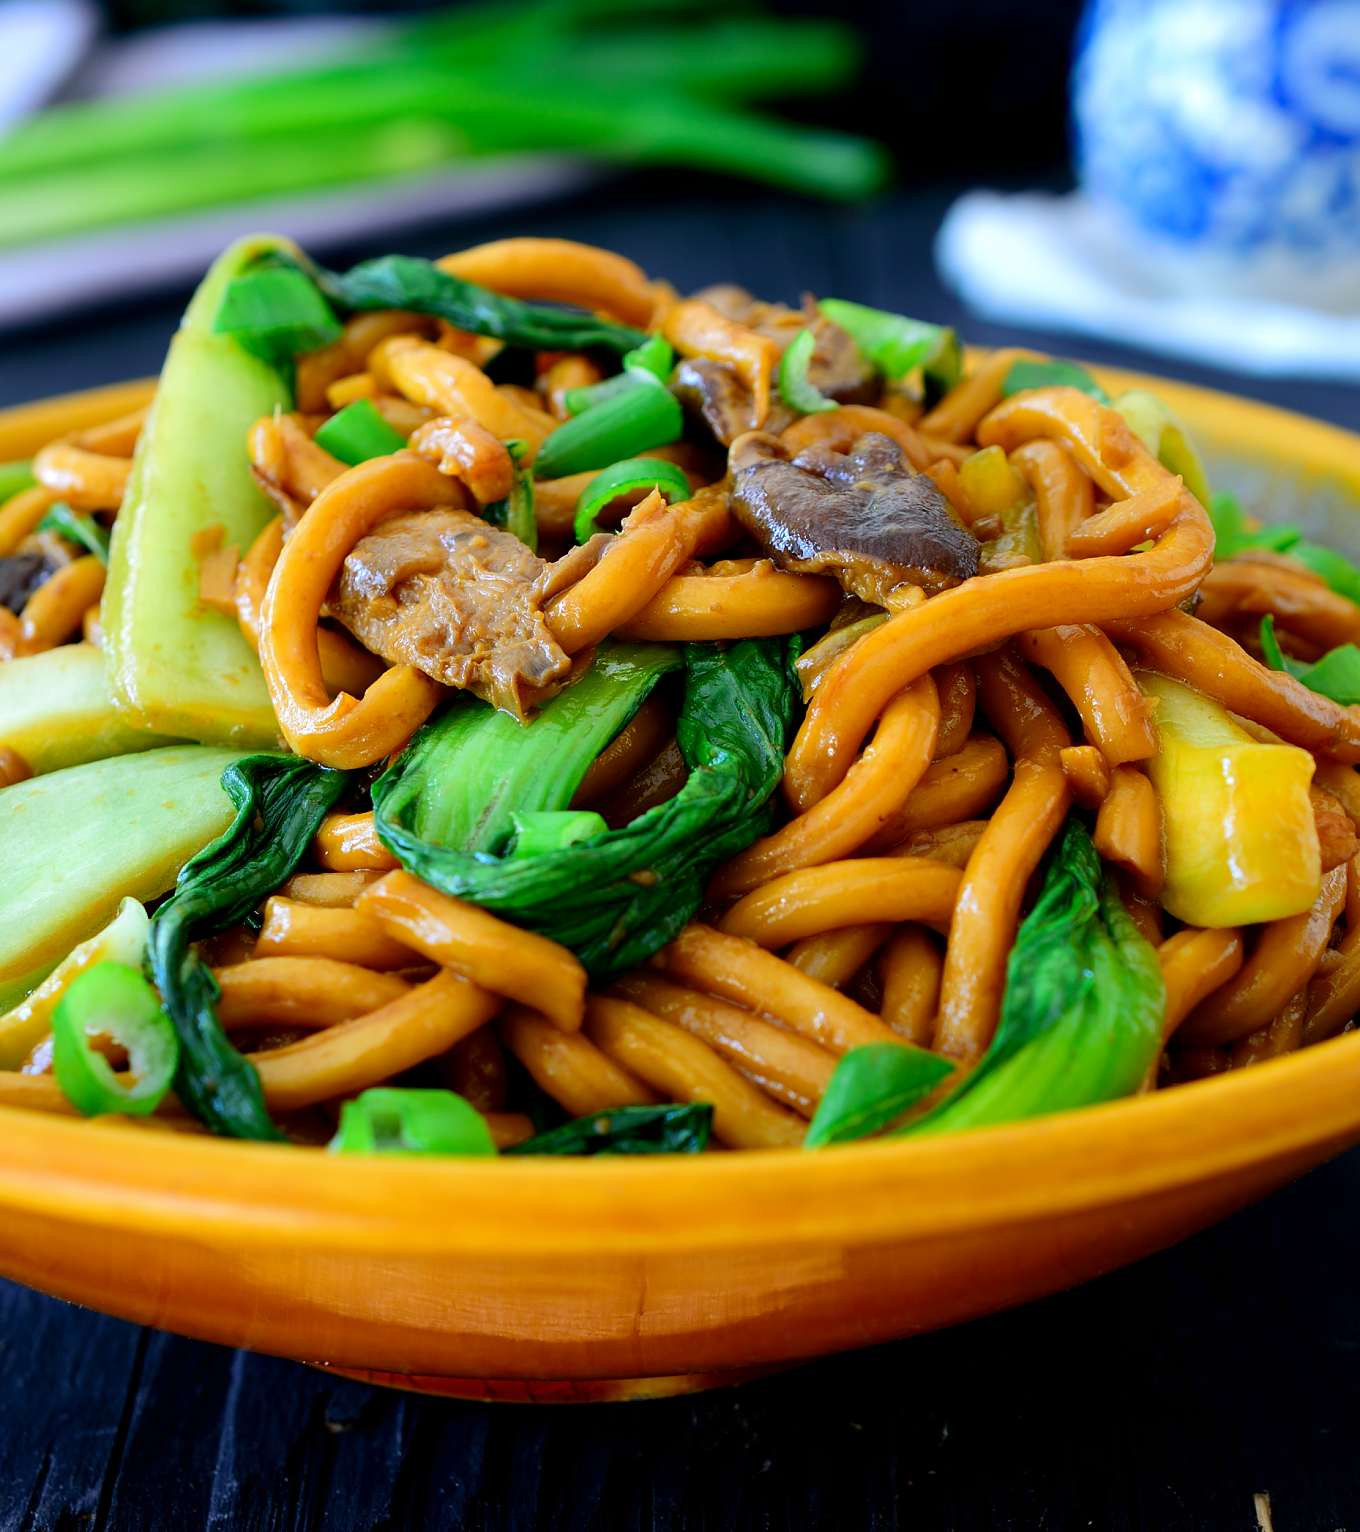 Vegetarian Noodle Recipes
 Ve arian Udon Noodle Recipe with Bok Choy